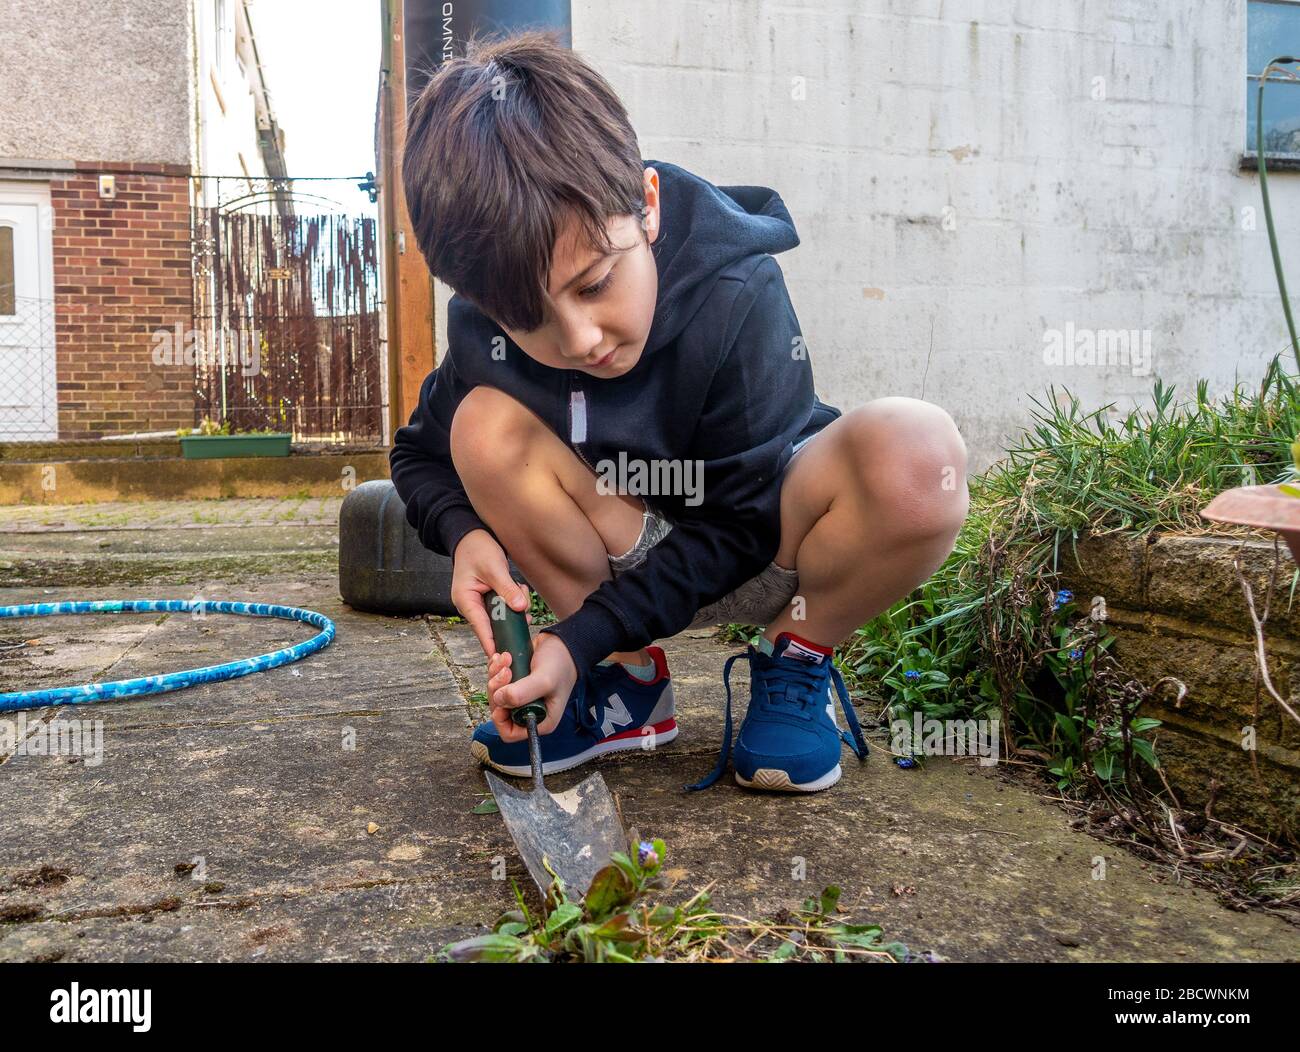 A young boy digging up weeds using a hand trowel in the garden. Stock Photo